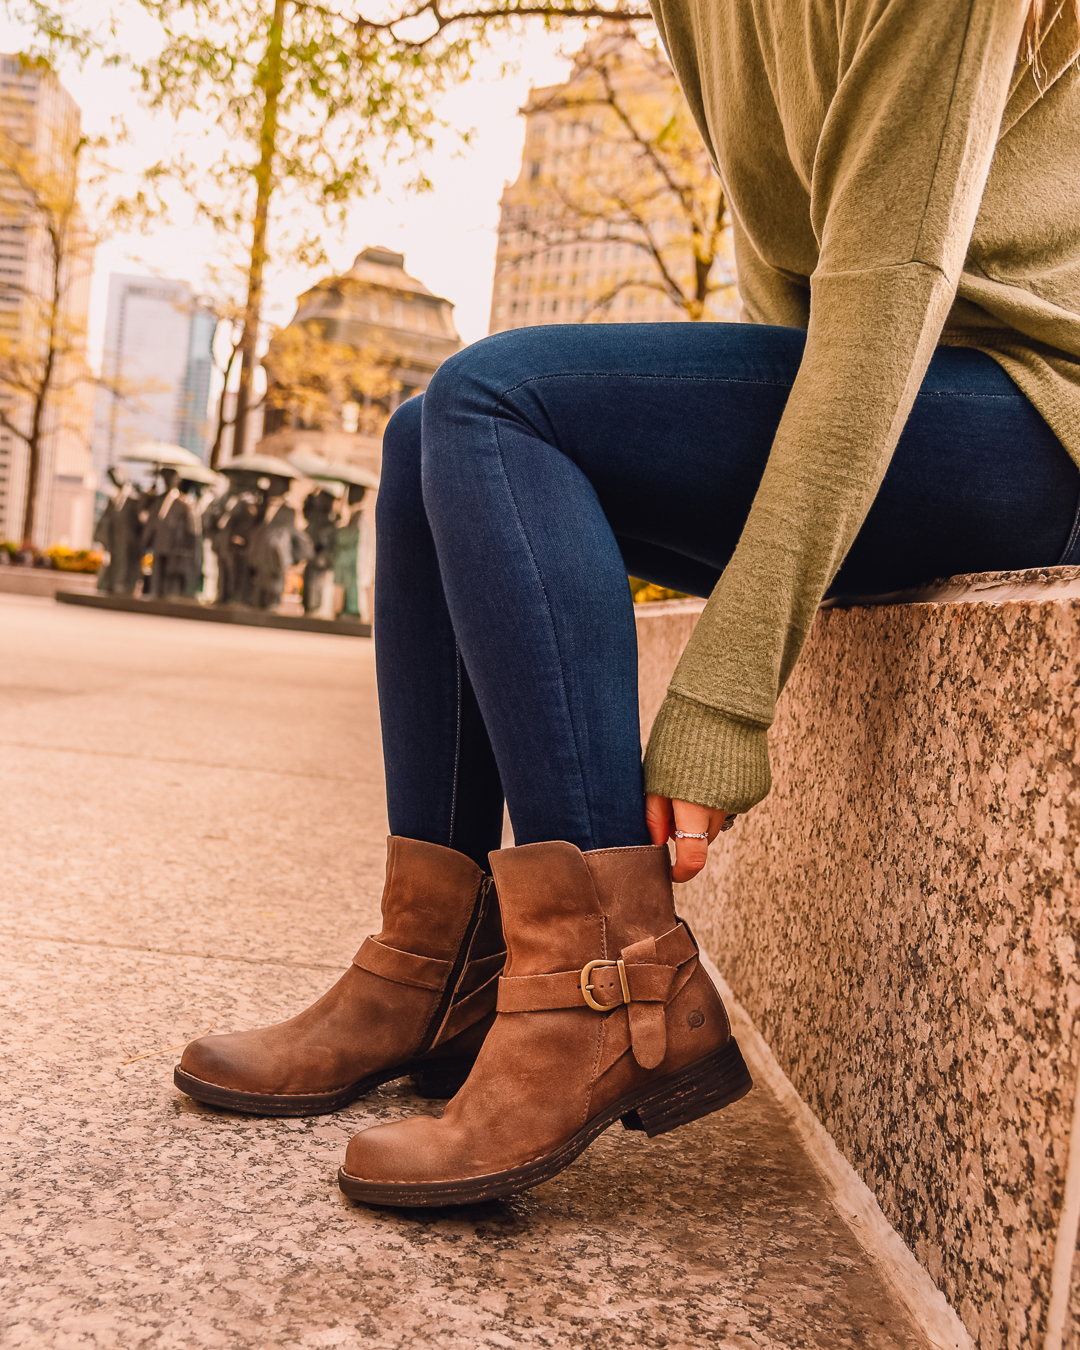 chicago fashion blogger visions of vogue wears beige boots with high waist skinny jeans